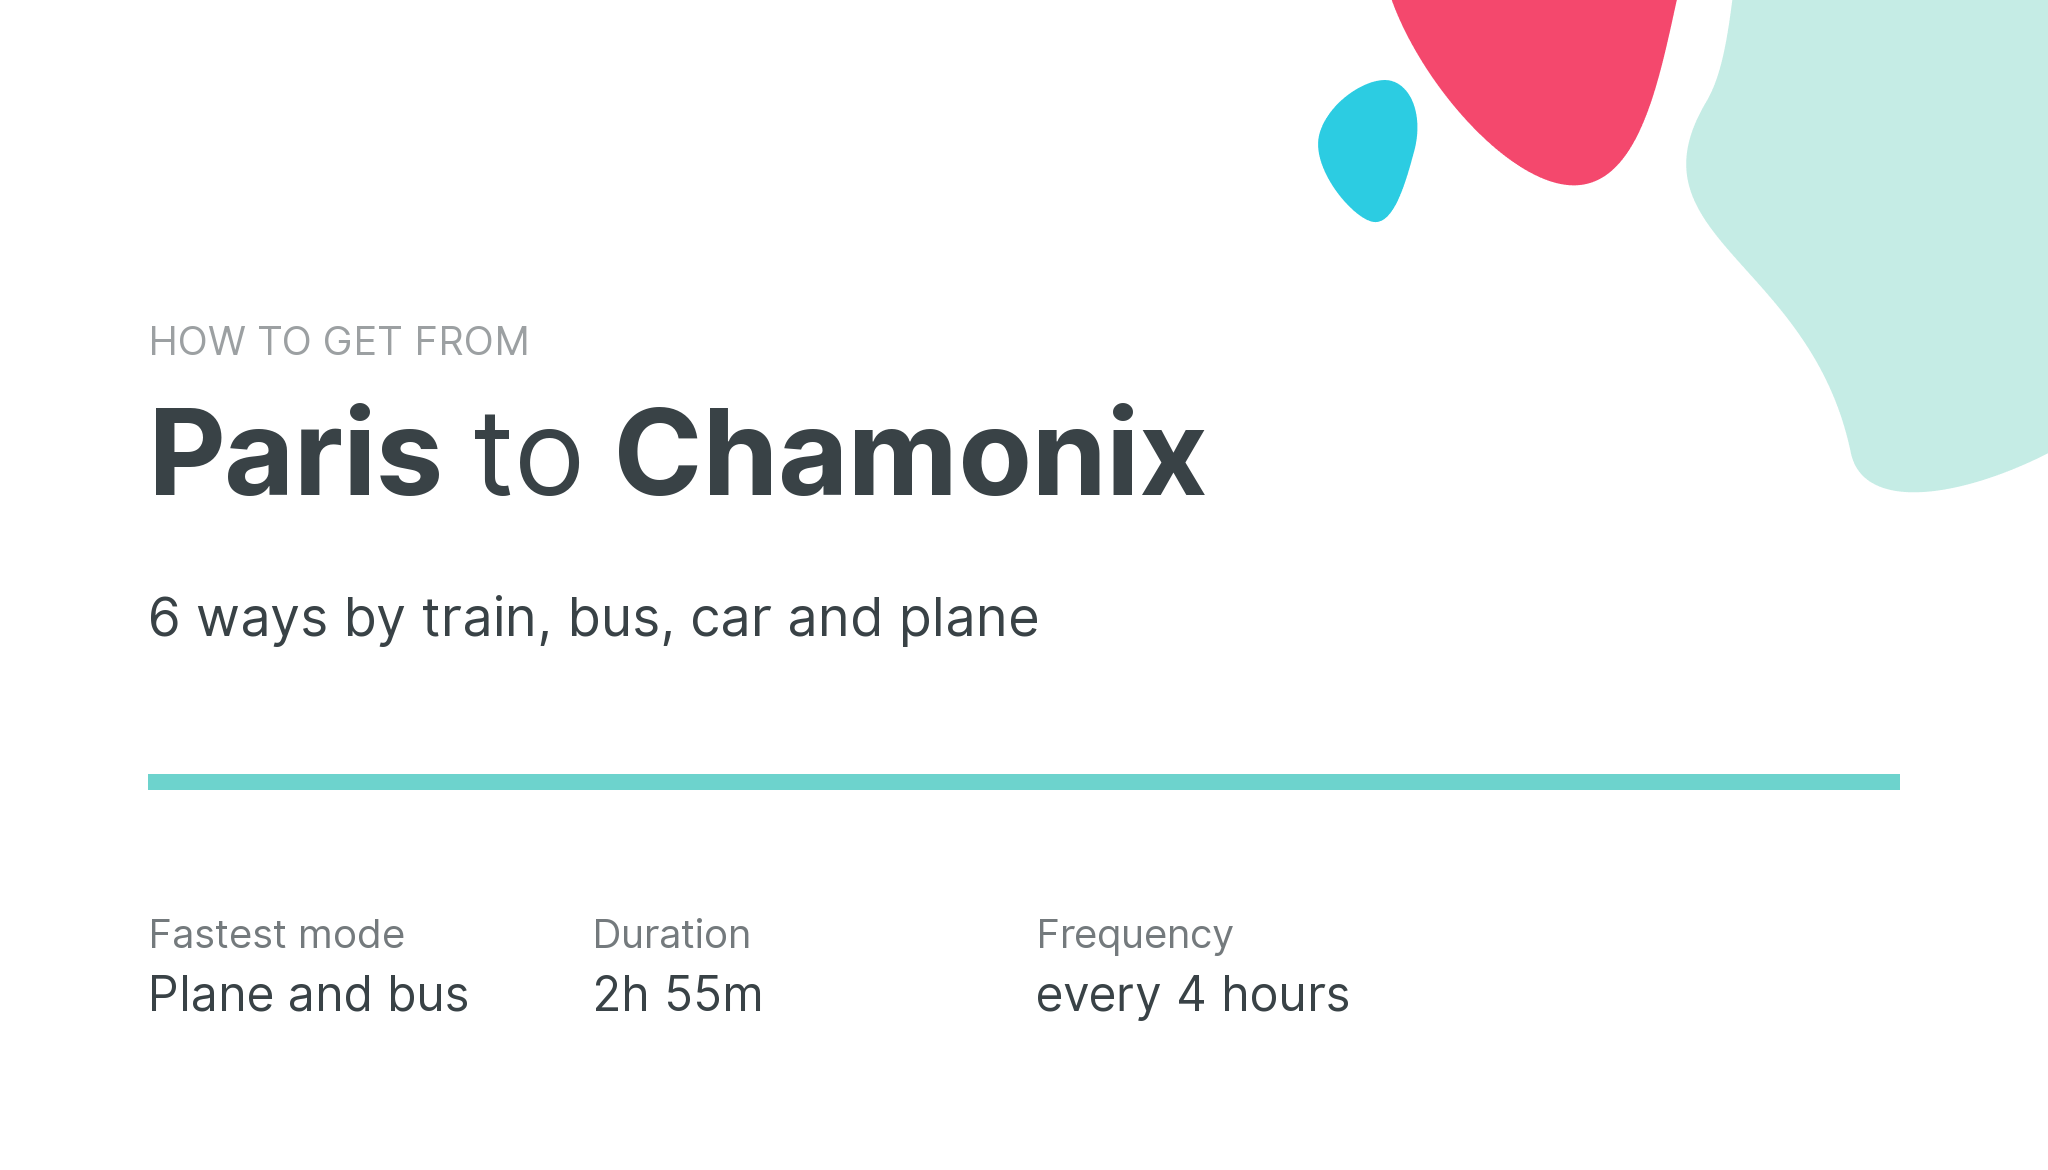 How do I get from Paris to Chamonix